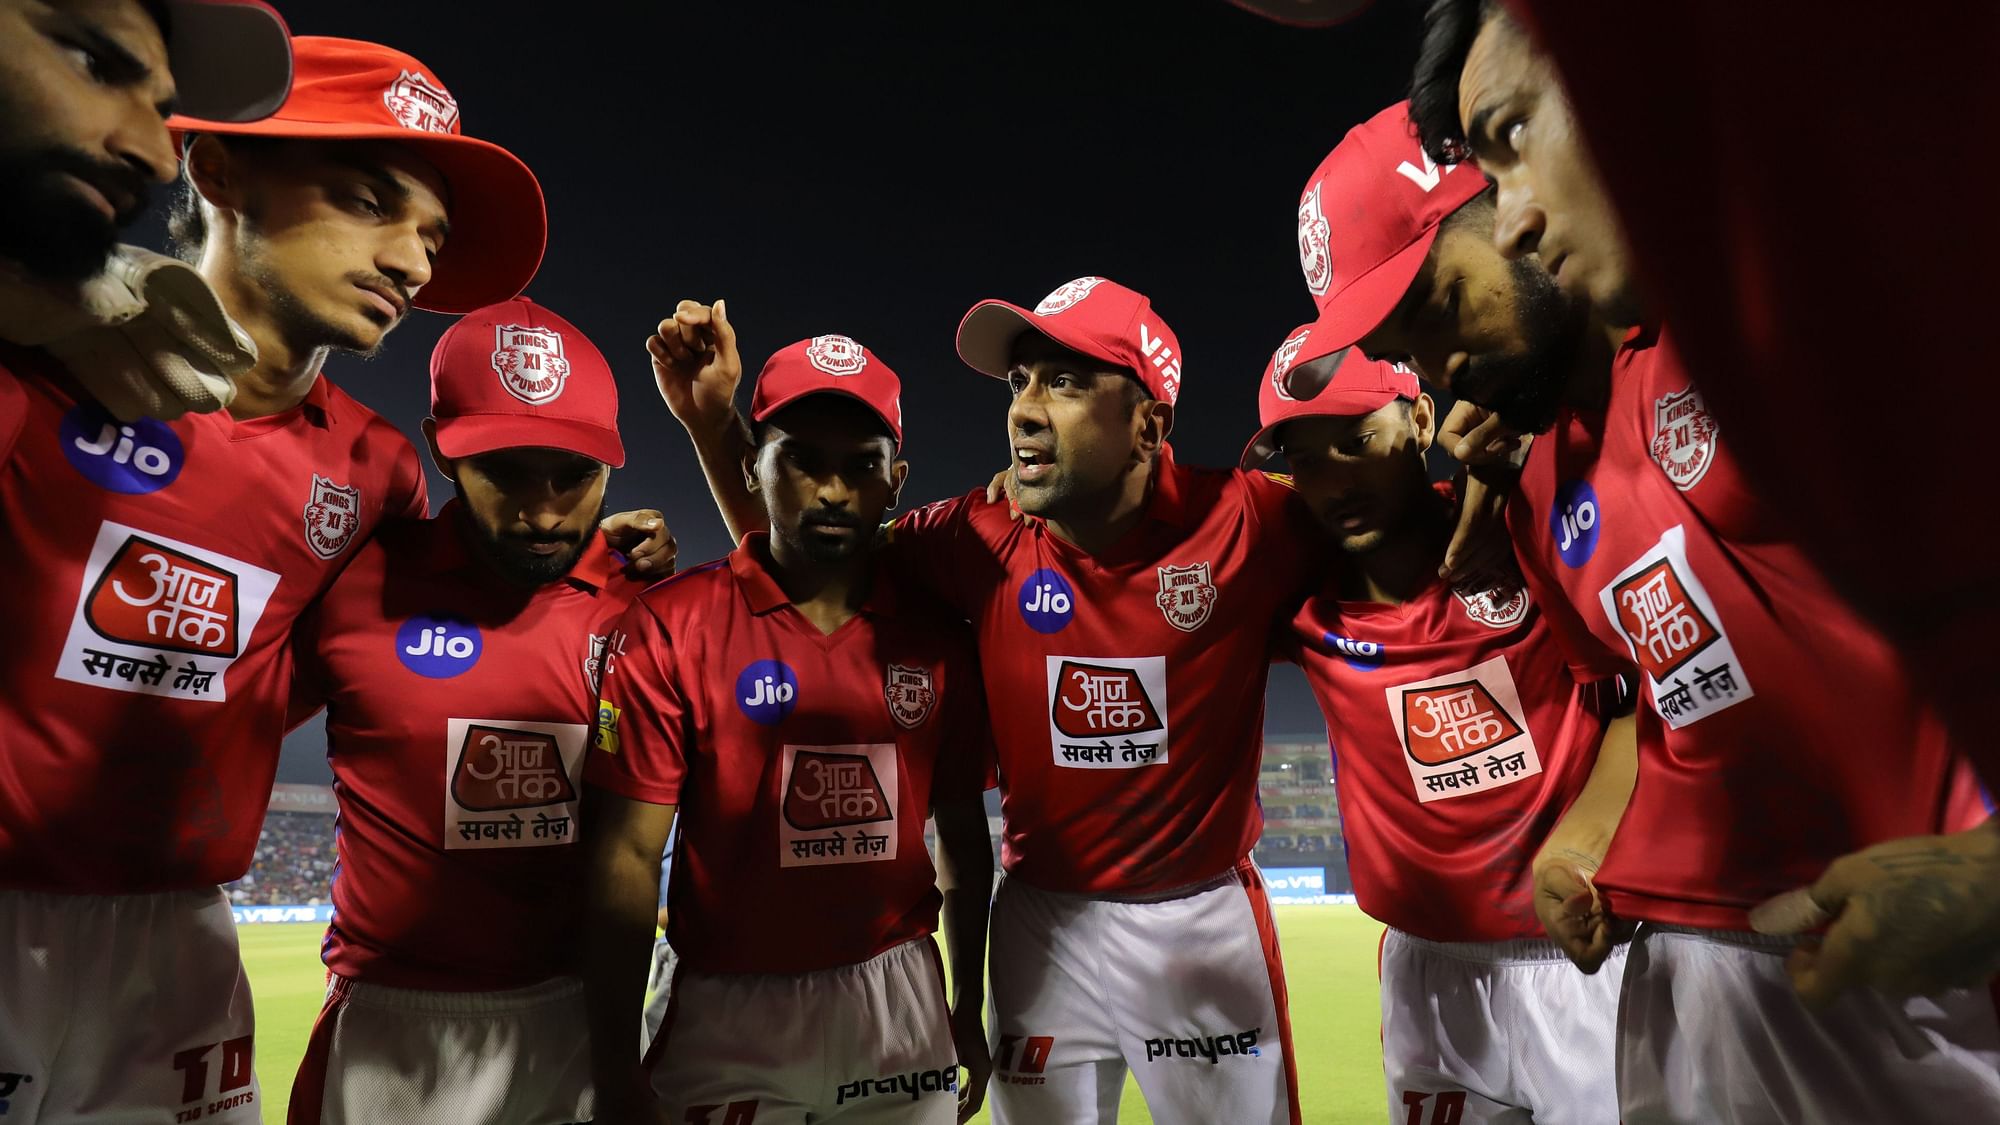 Kings XI Punjab defeated Rajasthan Royals by 12 runs in a second leg clash of the IPL on Tuesday.